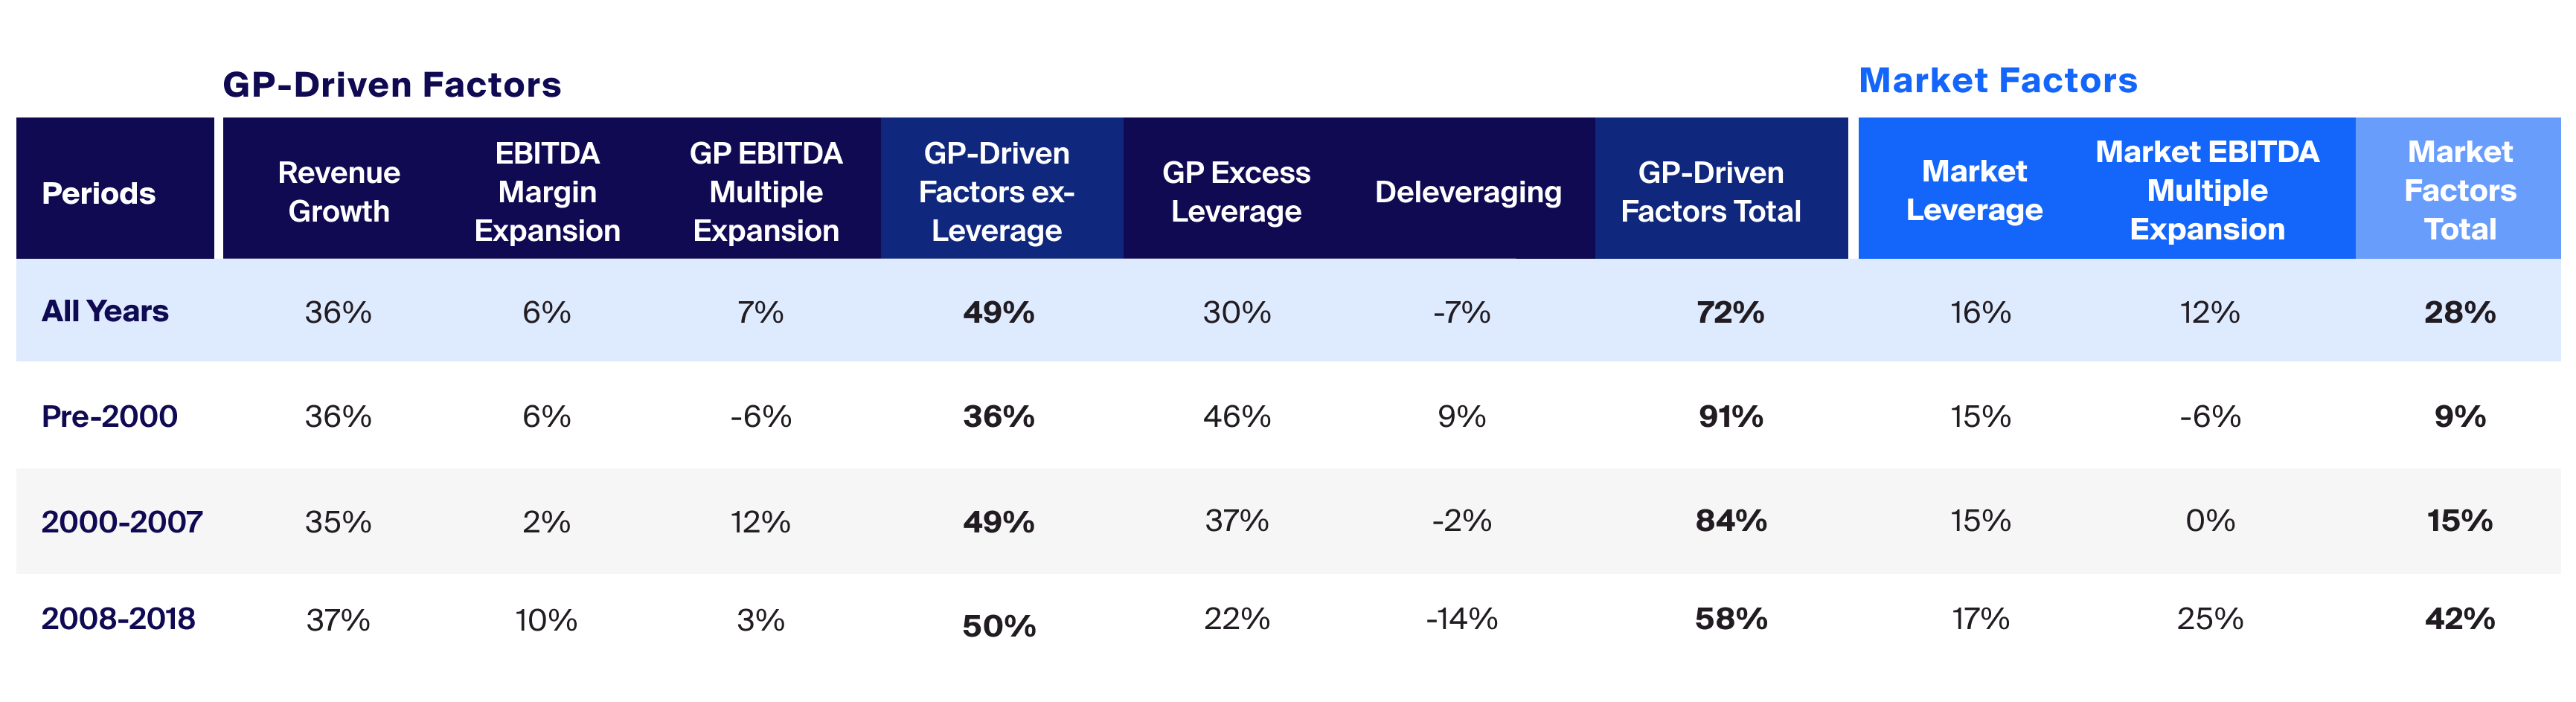 GP-driven factors drove most value creation historically in private equity deals and over time more attributable to non-leverage drivers (Exhibit 6)